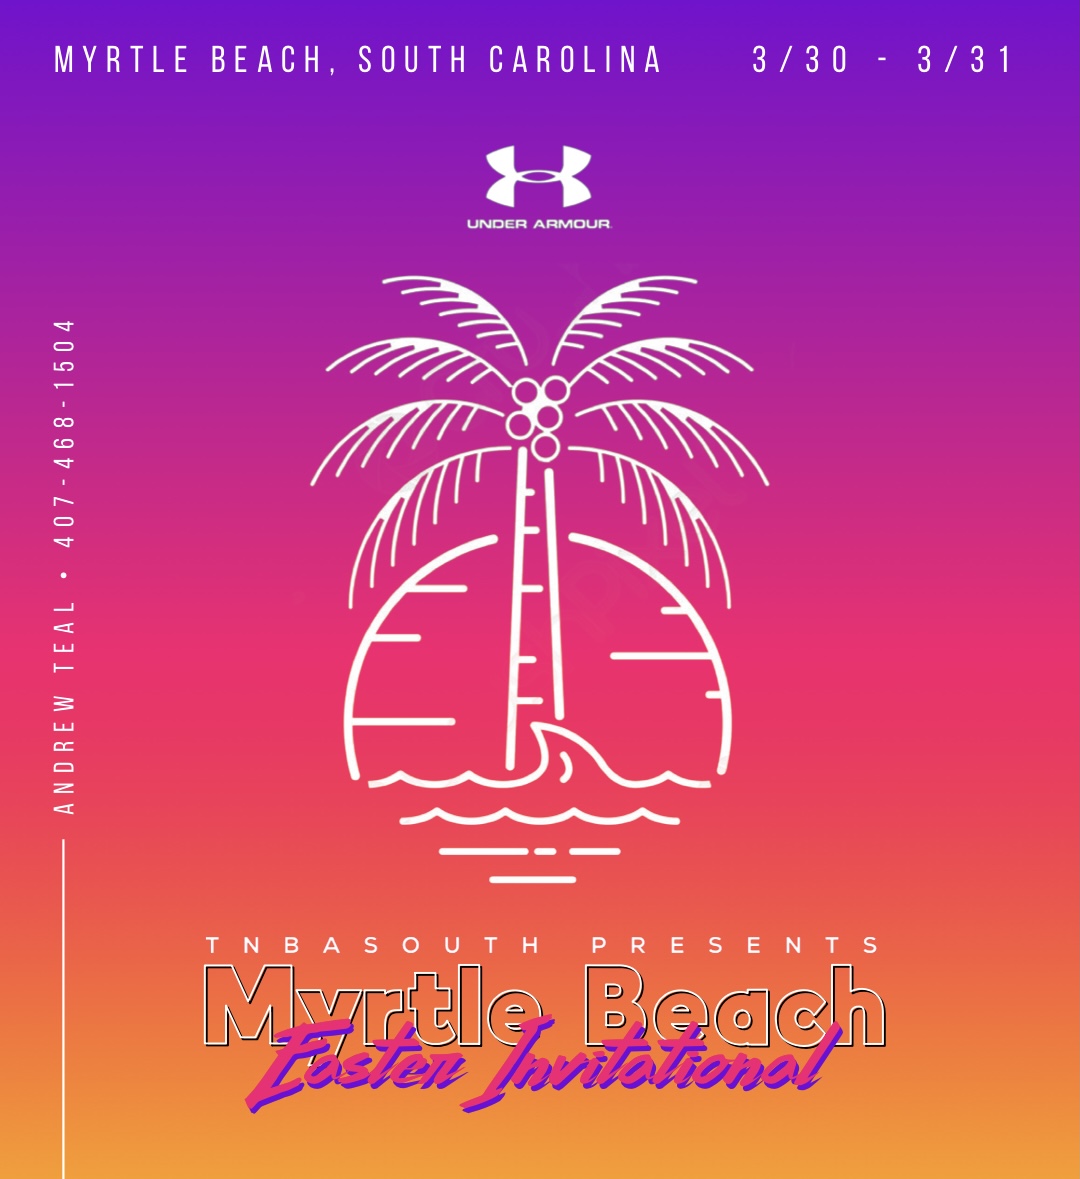 The National Basketball Academy 2023 Easter Invitational Event in Myrtle Beach